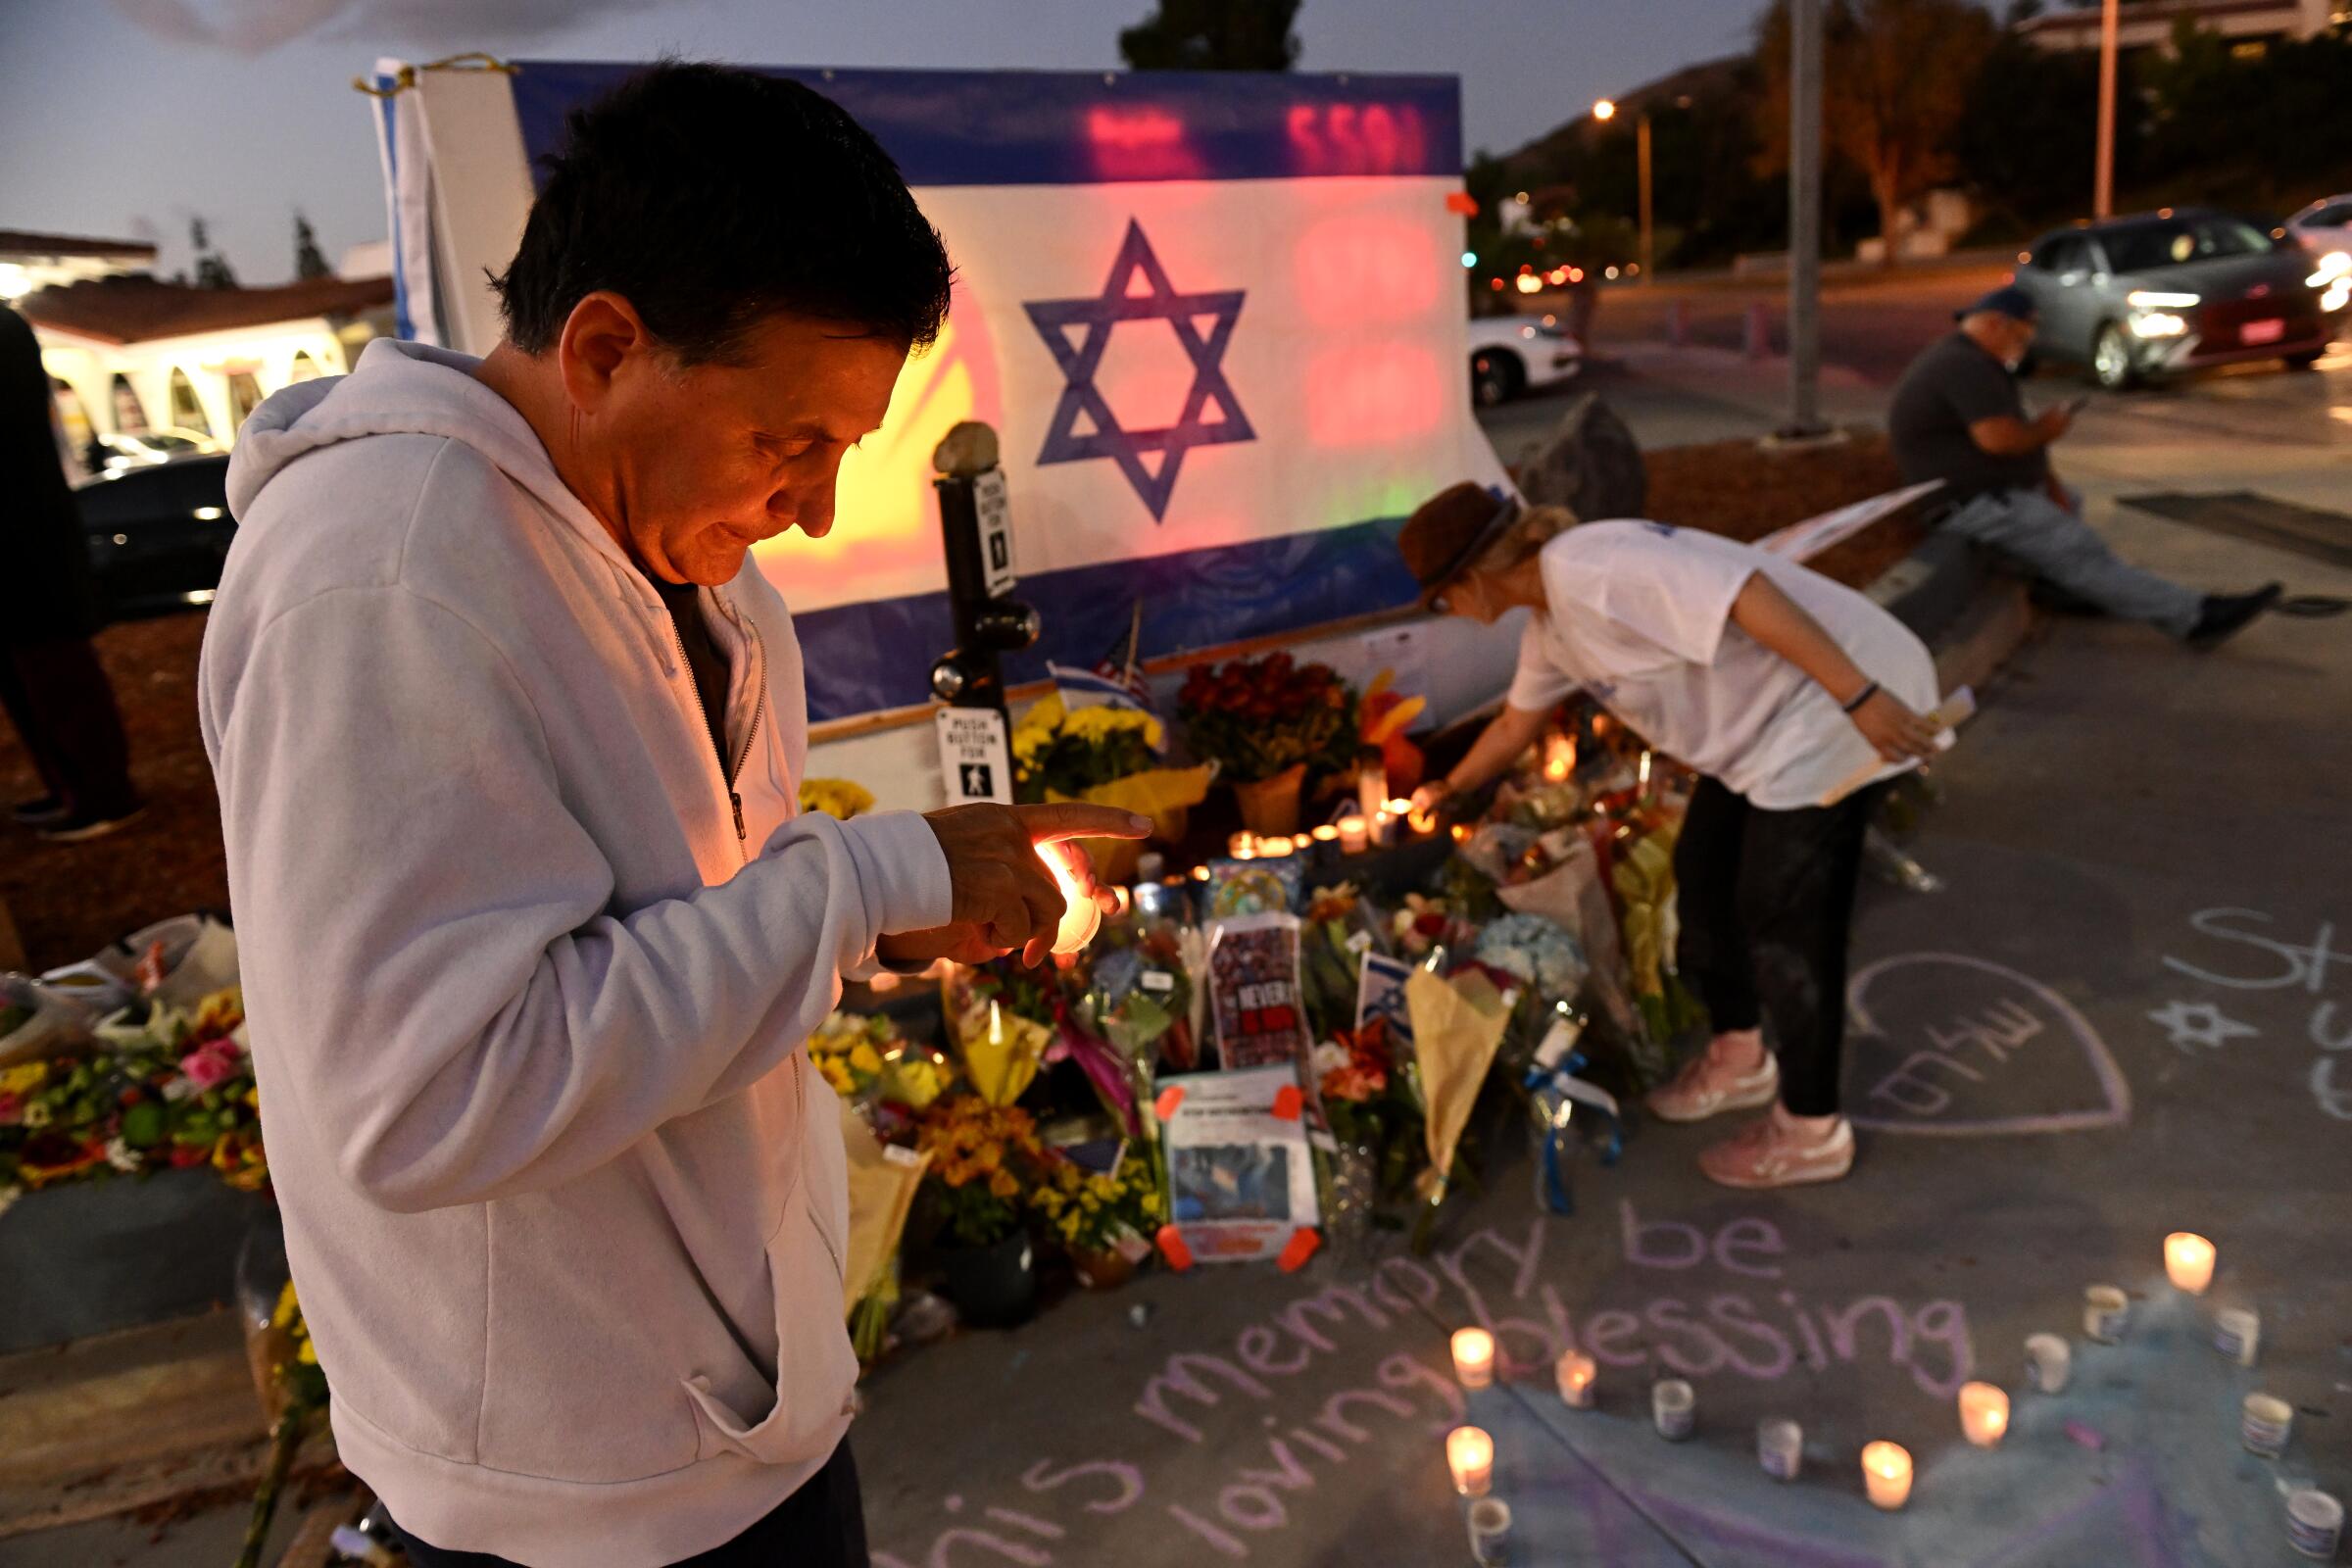 People pay respects at a memorial for Paul Kessler, who died after a confrontation at a protest in Thousand Oaks.